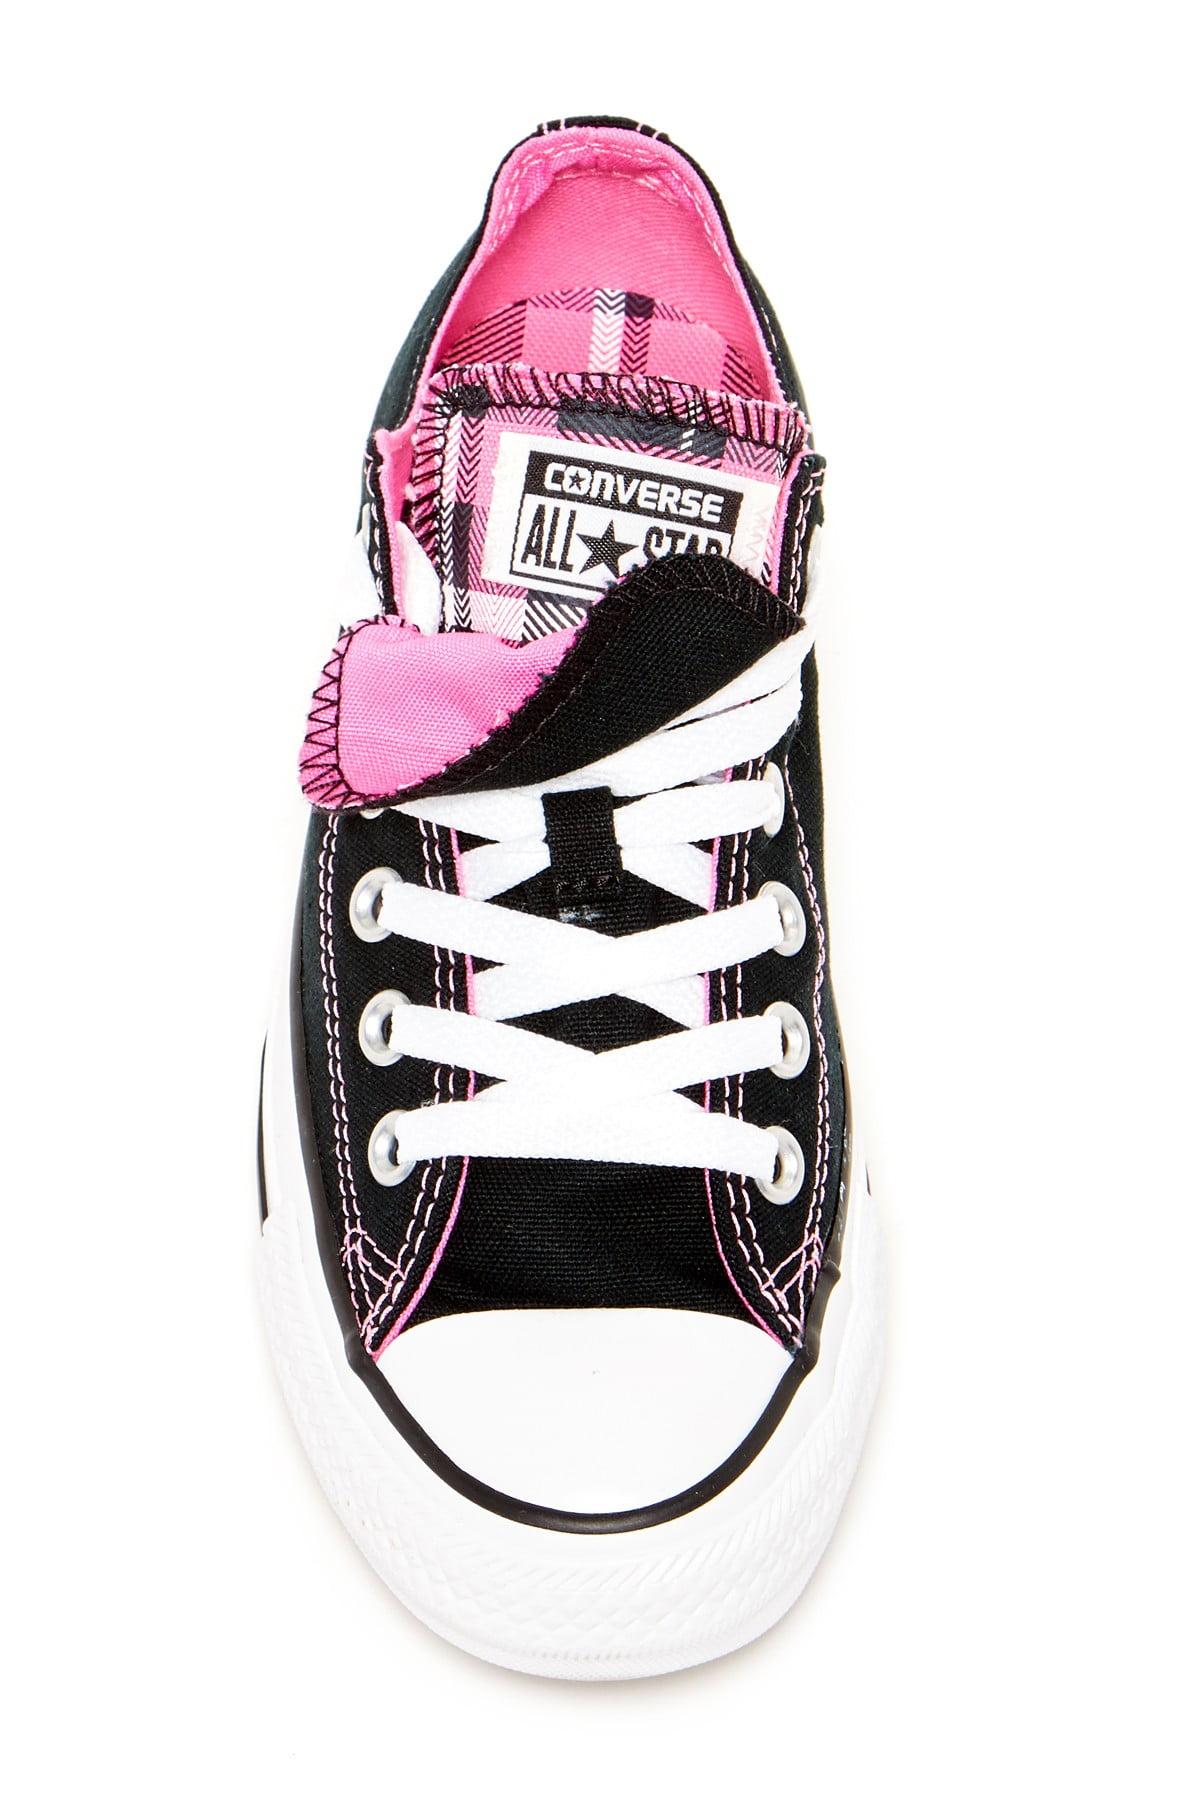 trug protest polet Converse Chuck Taylor Double Tongue Sneaker in Pink | Lyst